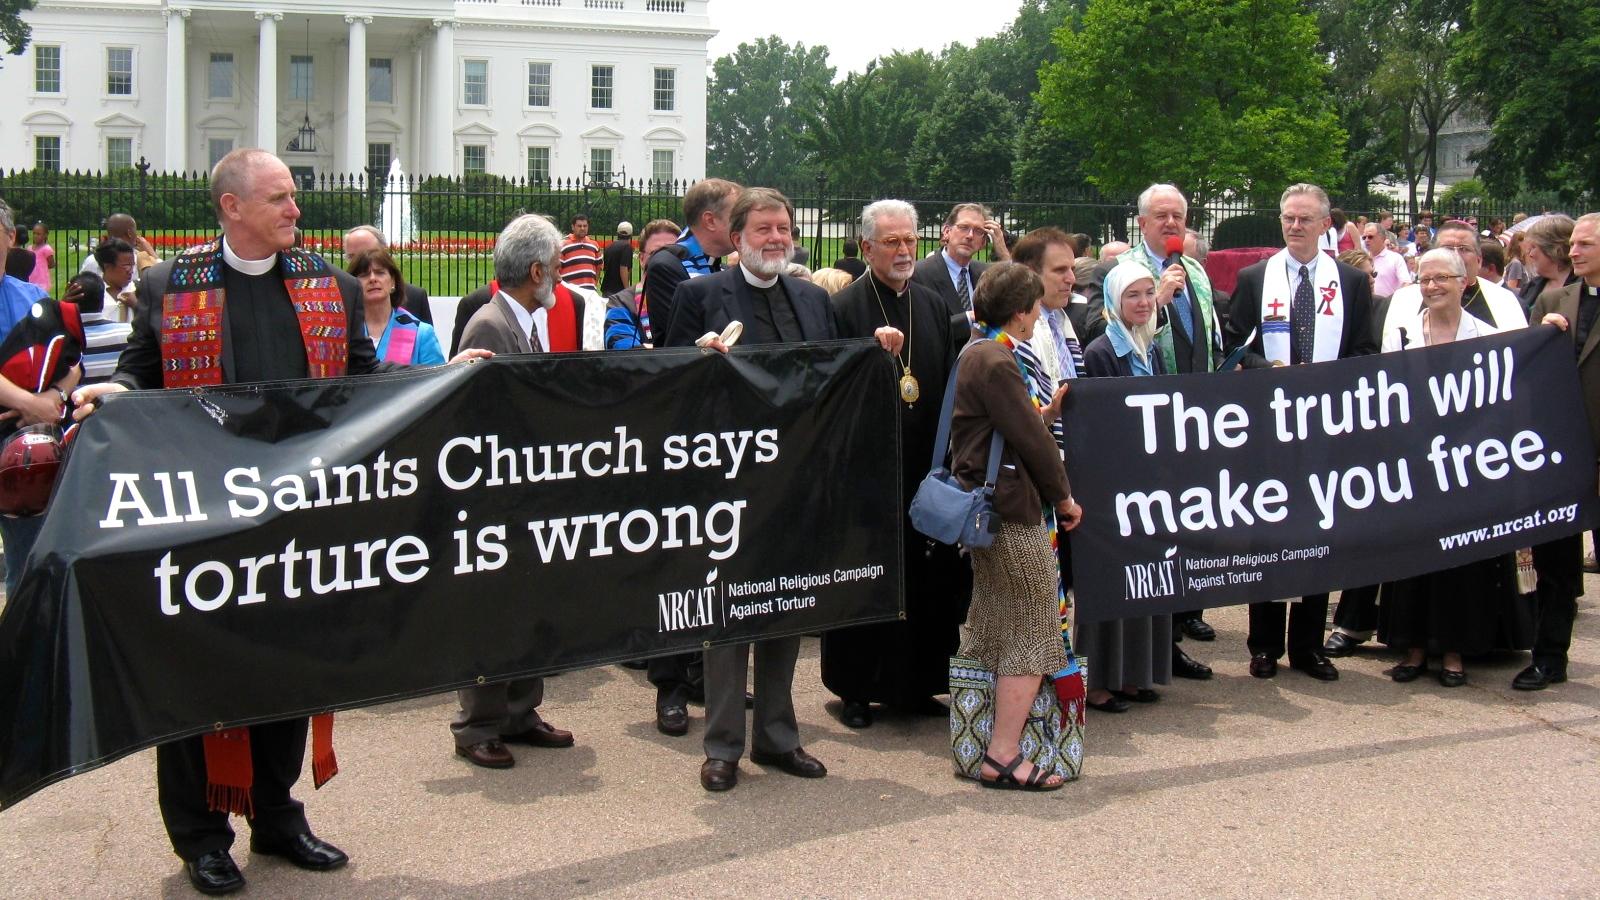 Supporters of the National Religious Campaign Against Torture attended a rally outside the White House in 2009.  